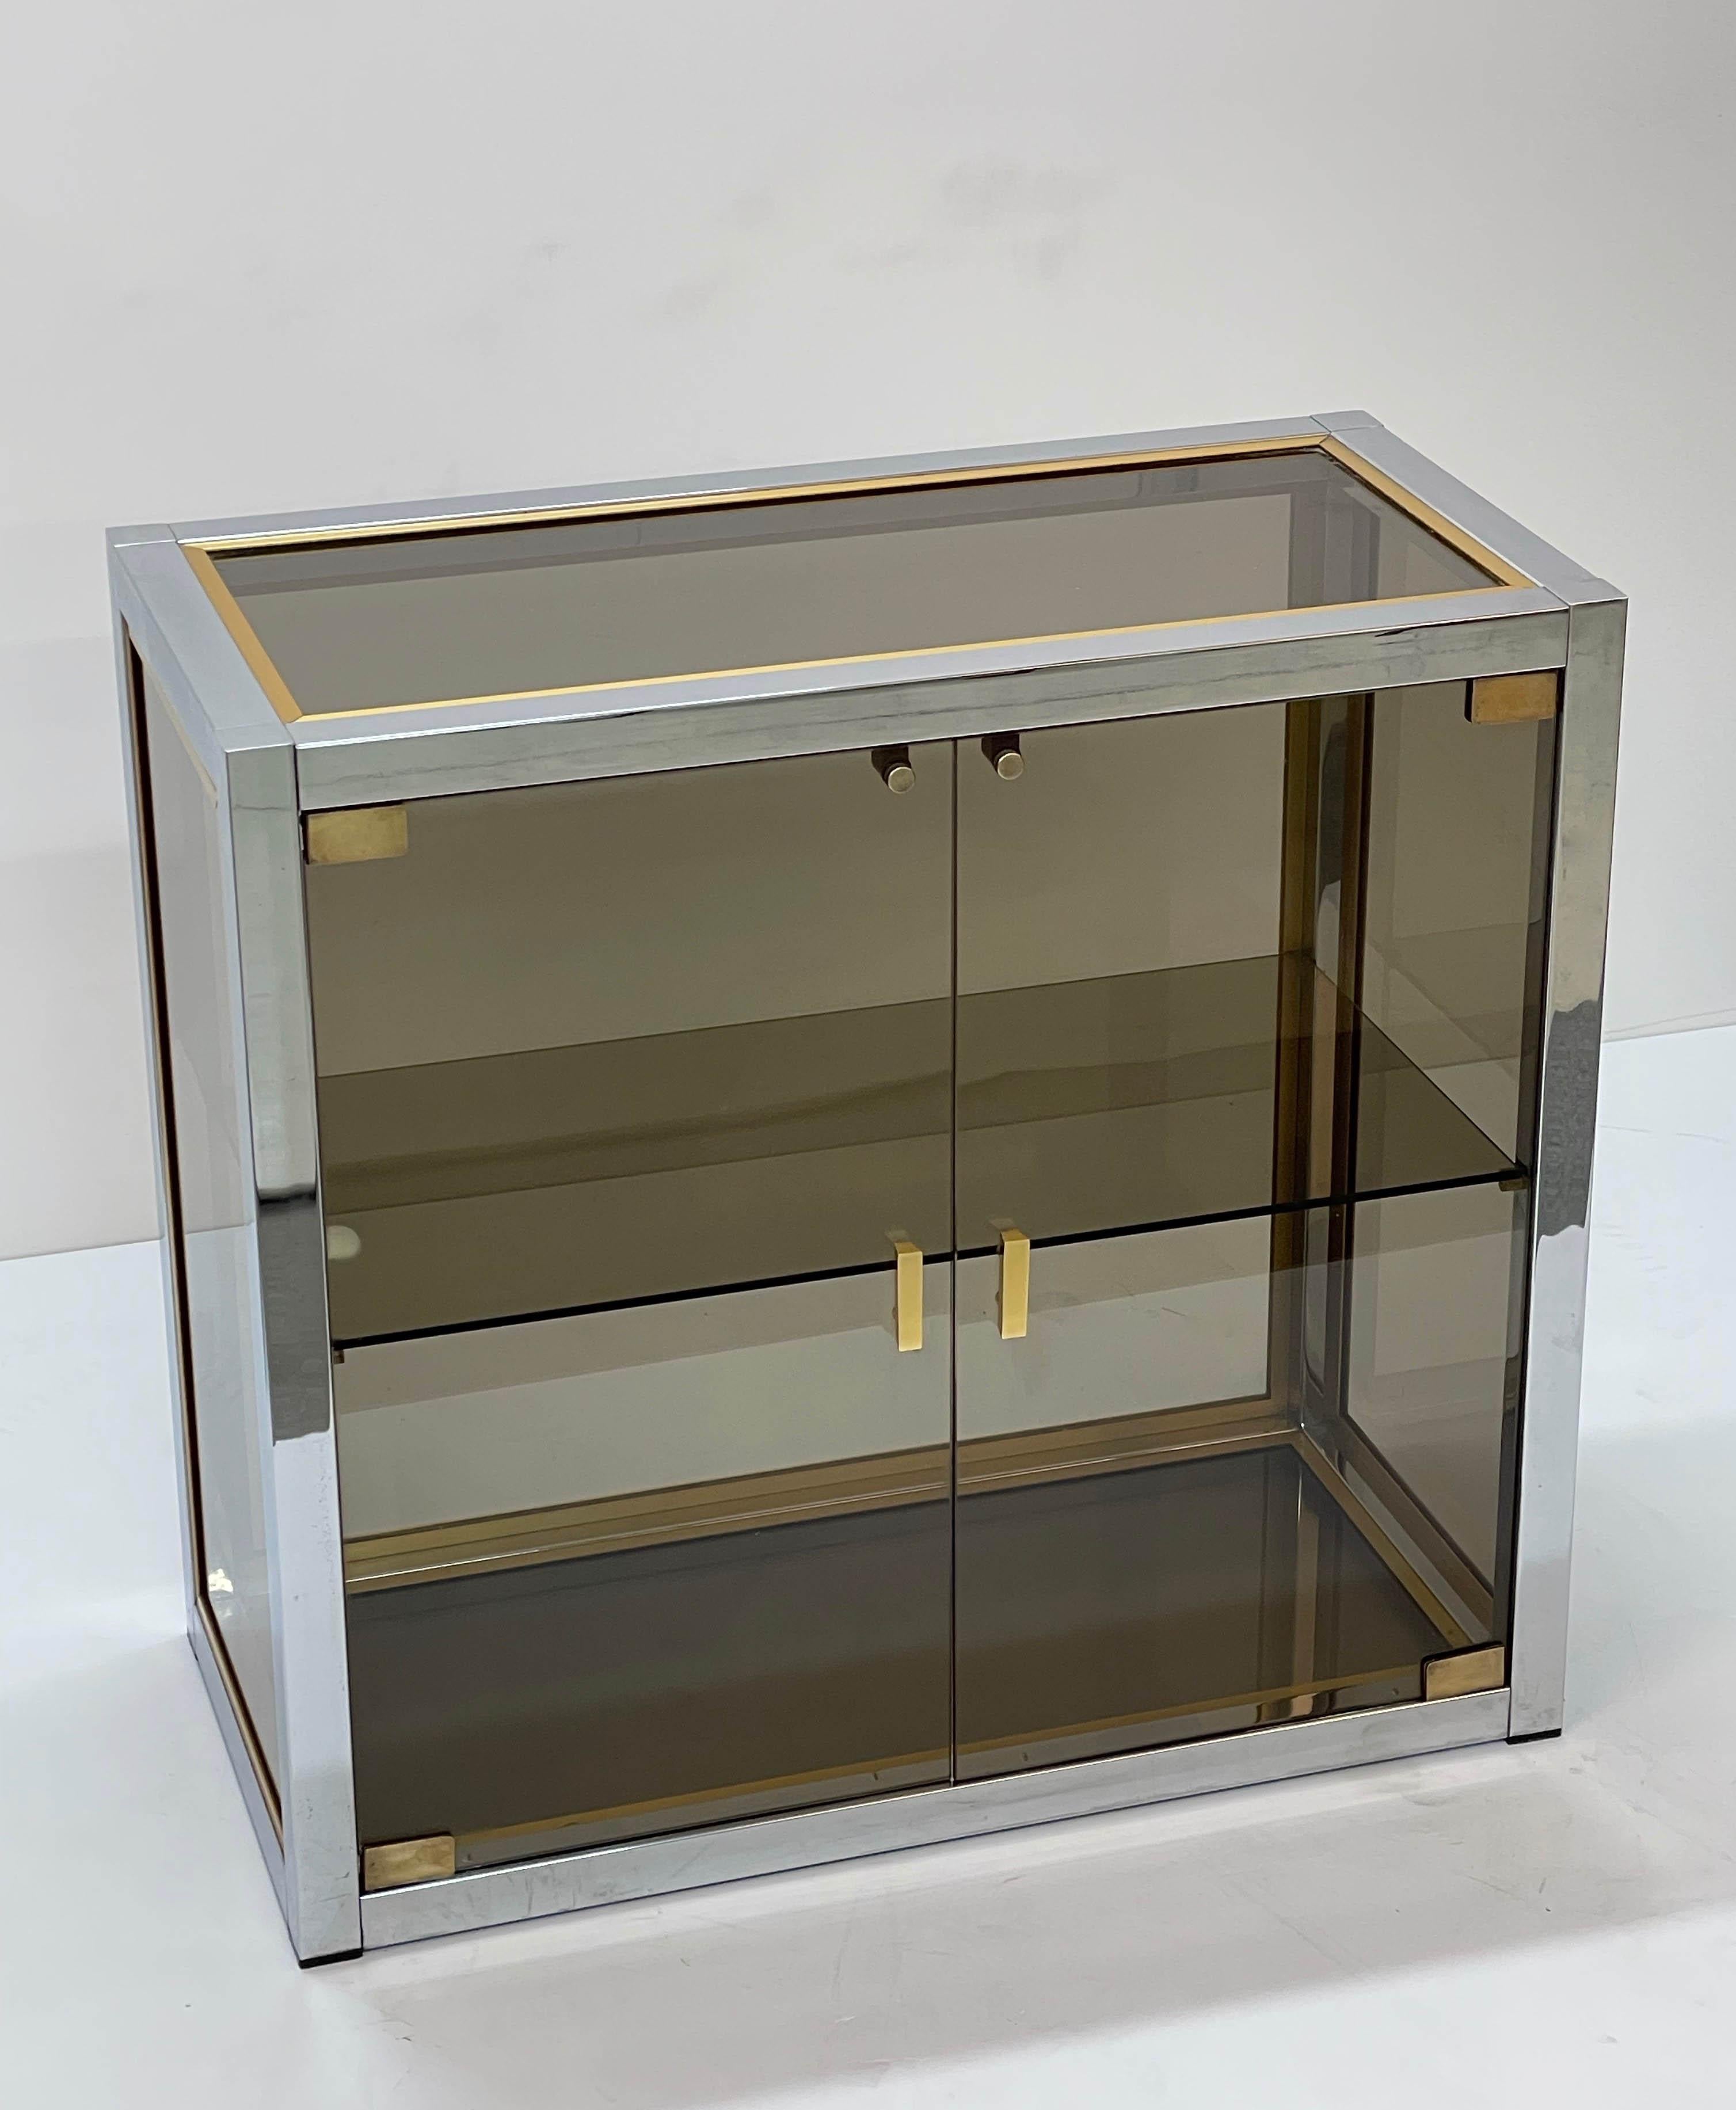 virgil metal and glass storage cabinet